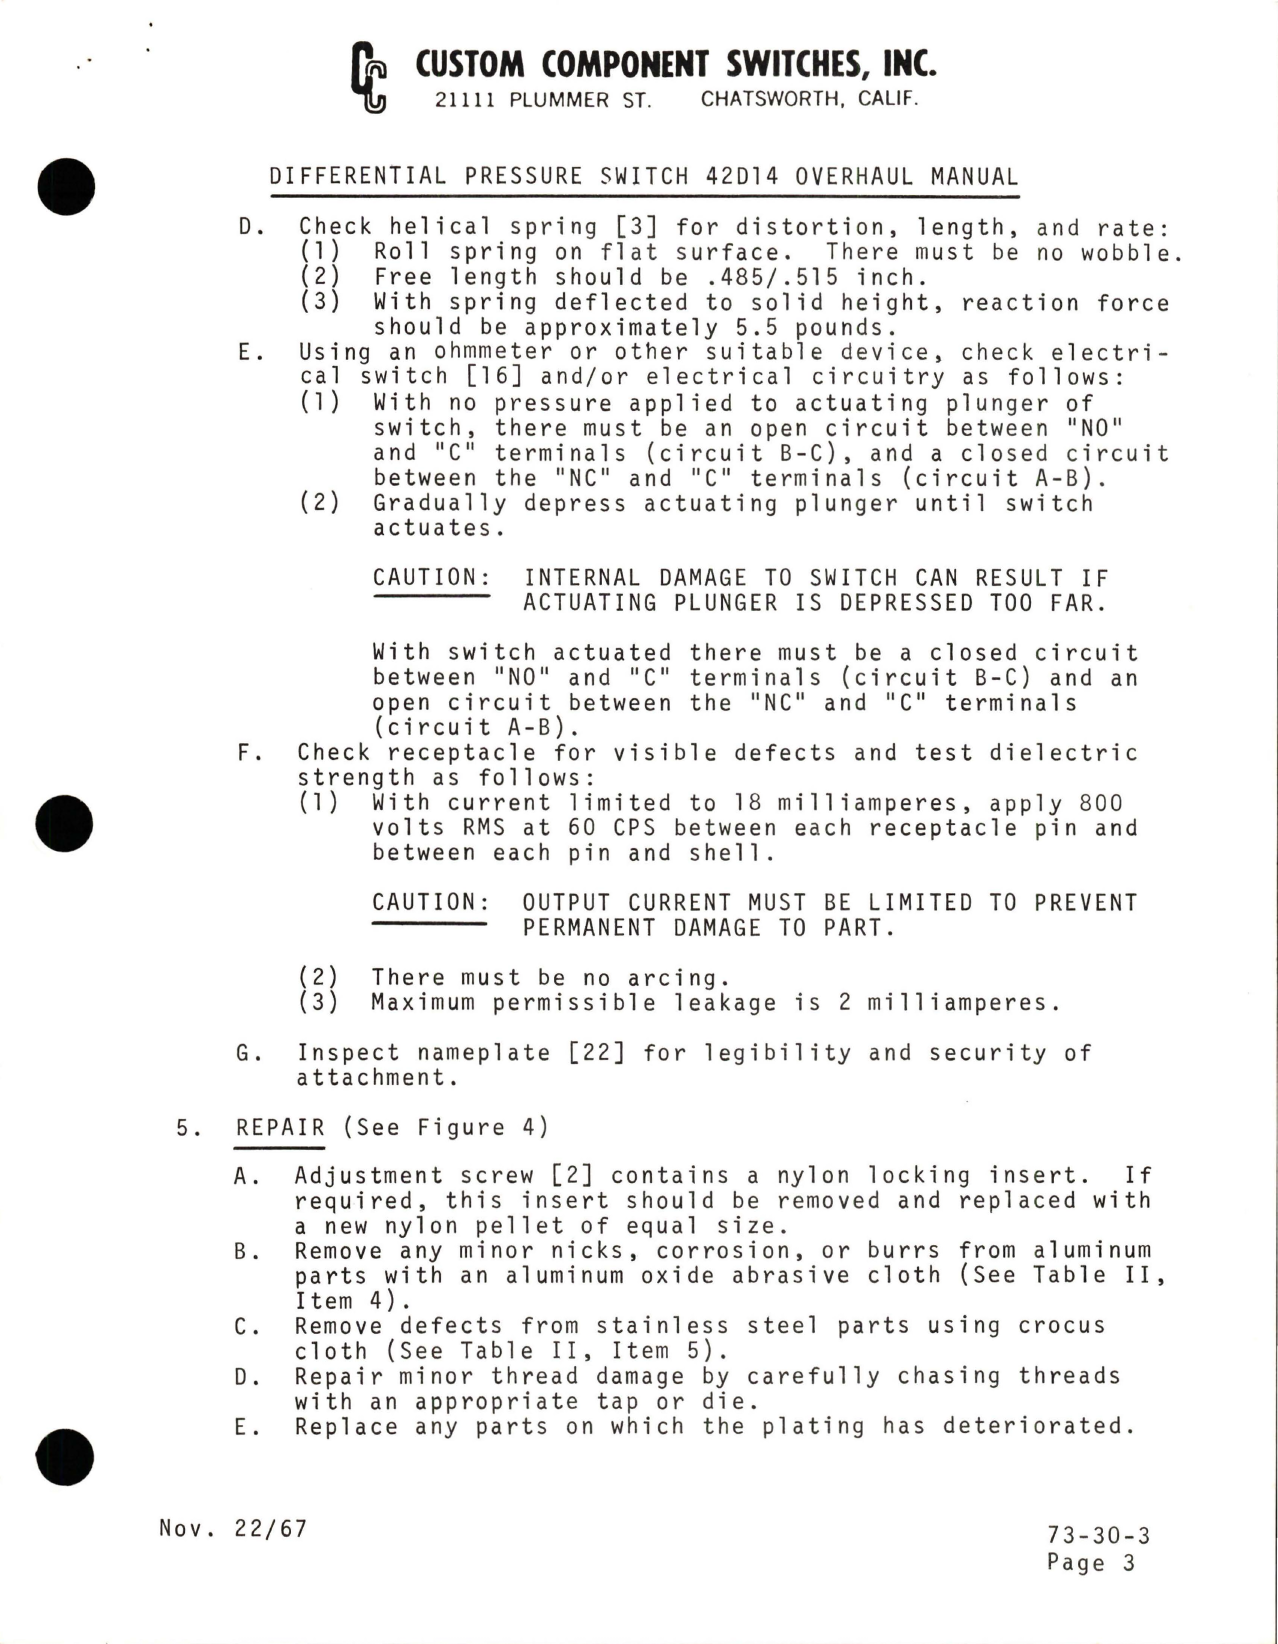 Sample page 5 from AirCorps Library document: Overhaul Manual for Differential Pressure Switch - Part 42D14 